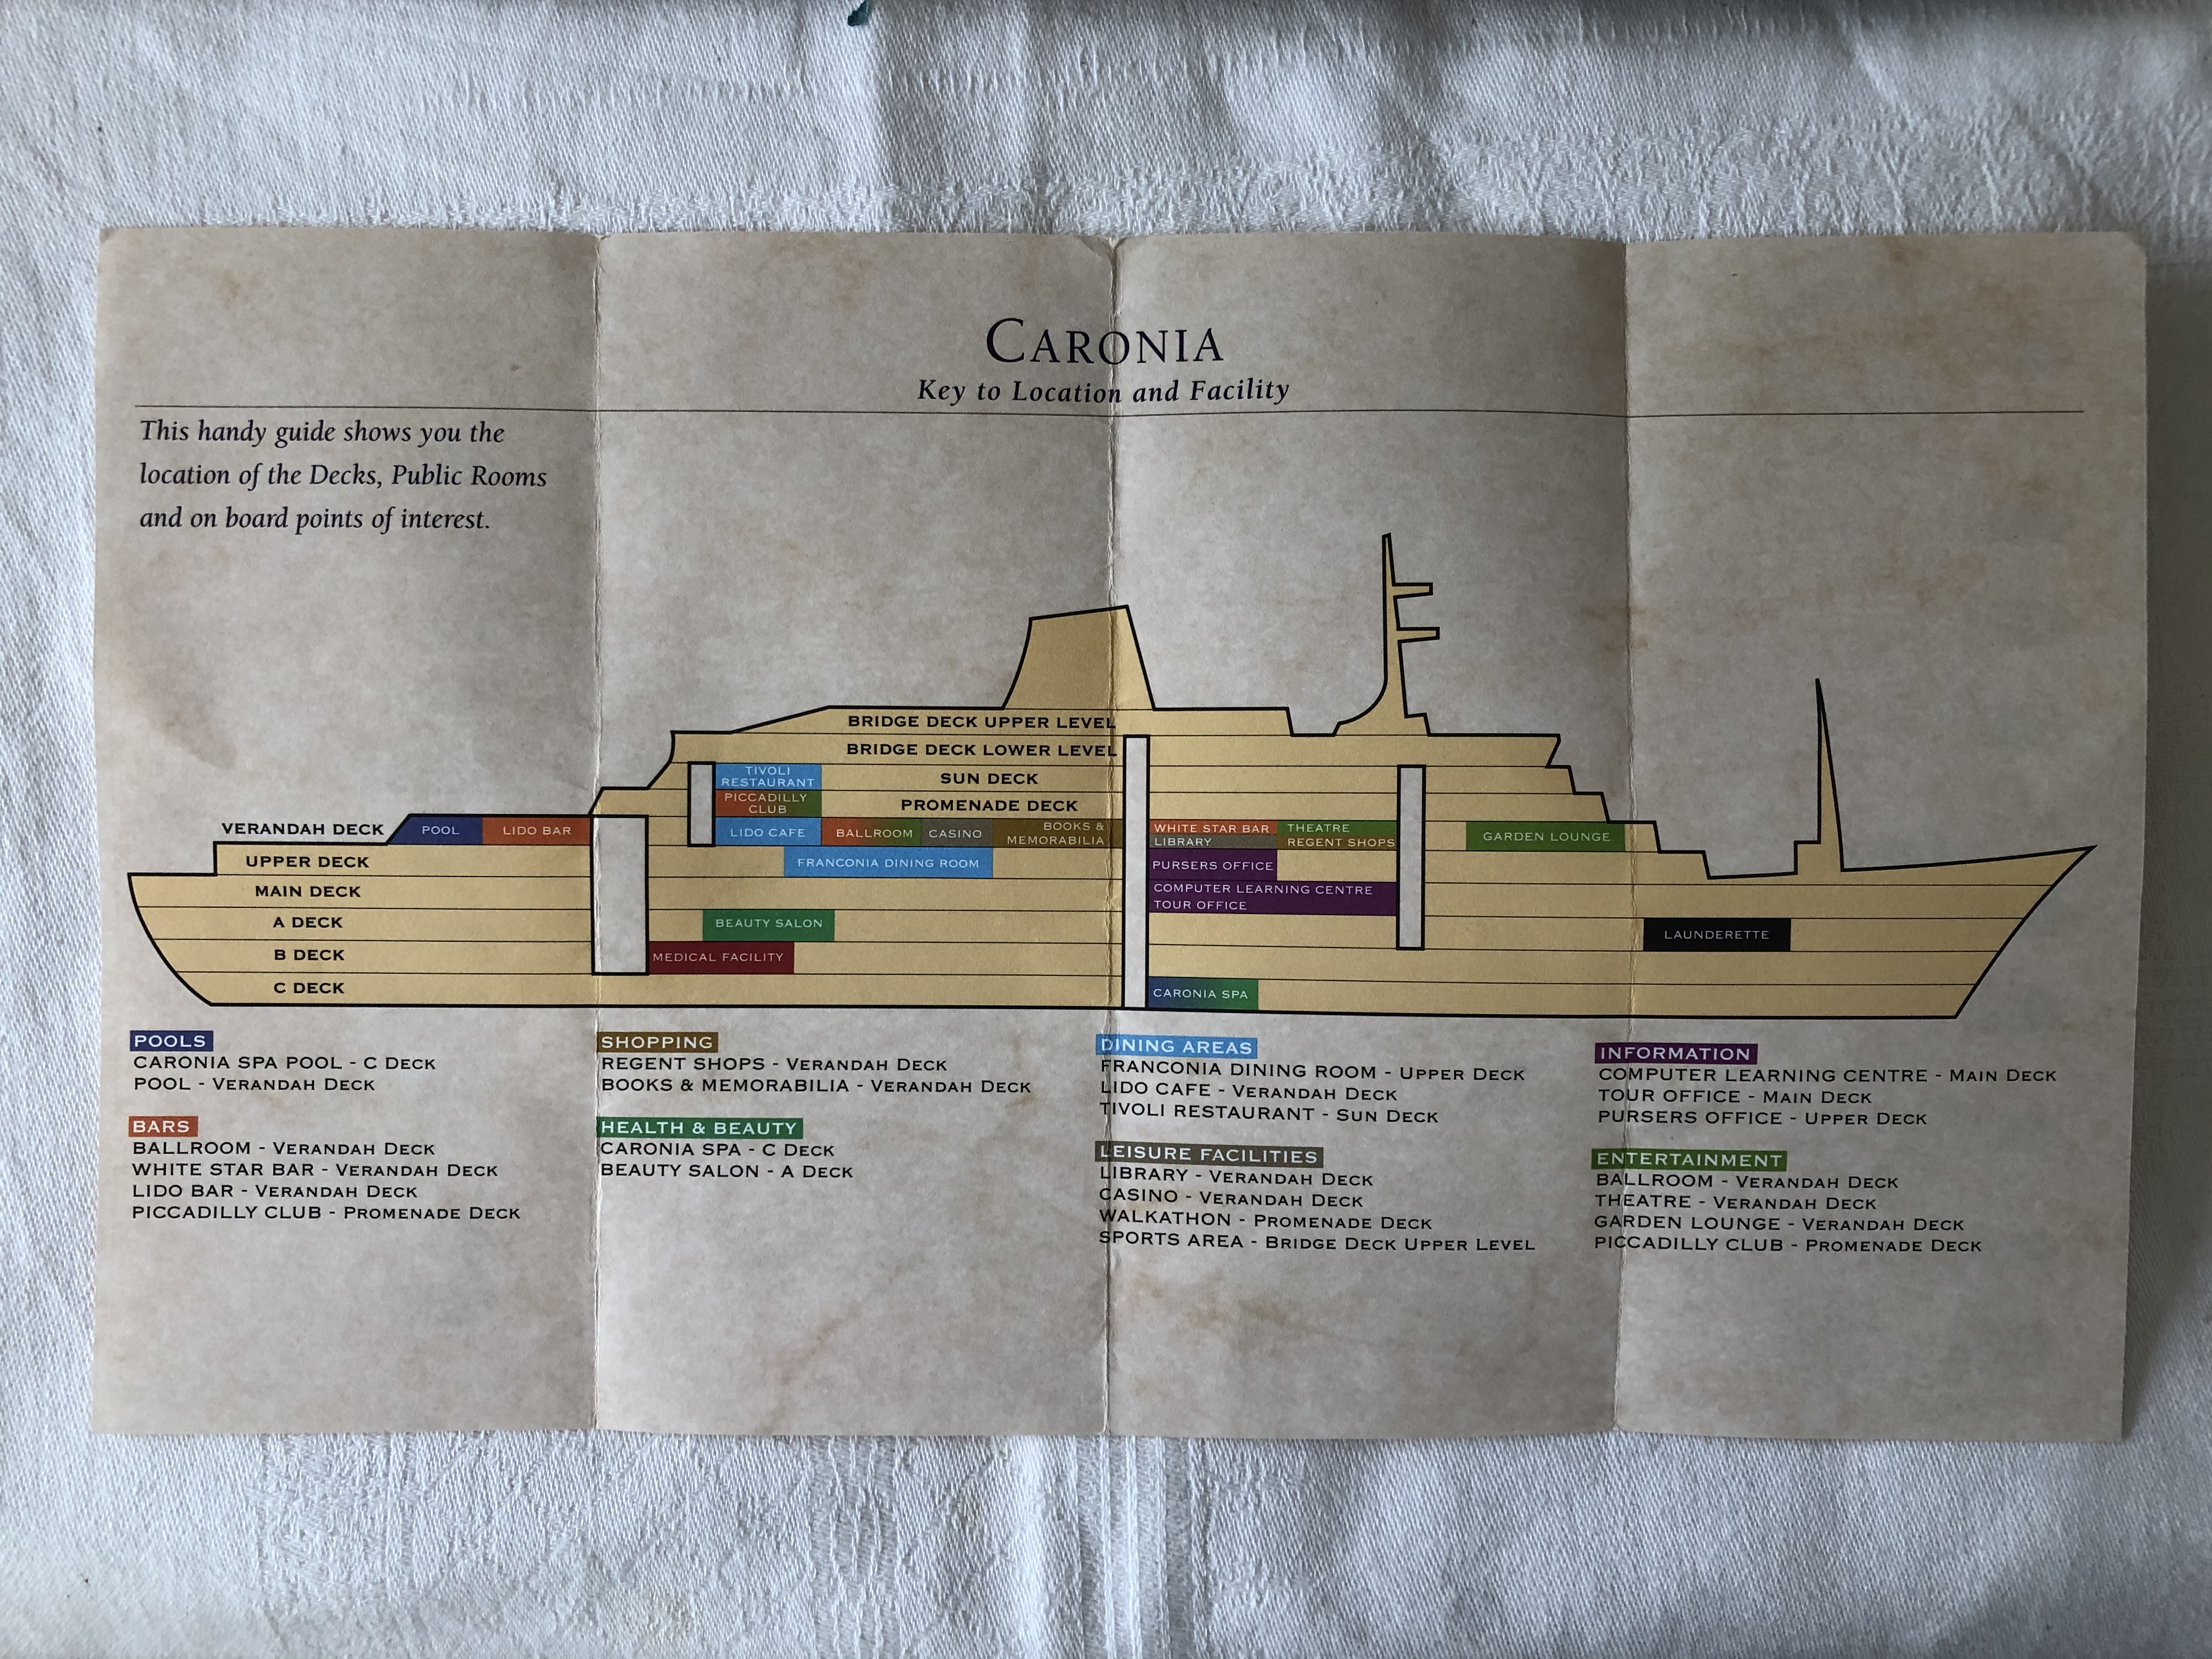 PASSENGER SHIP LOCATION MAP FROM THE CUNARD LINE VESSEL THE CARONIA